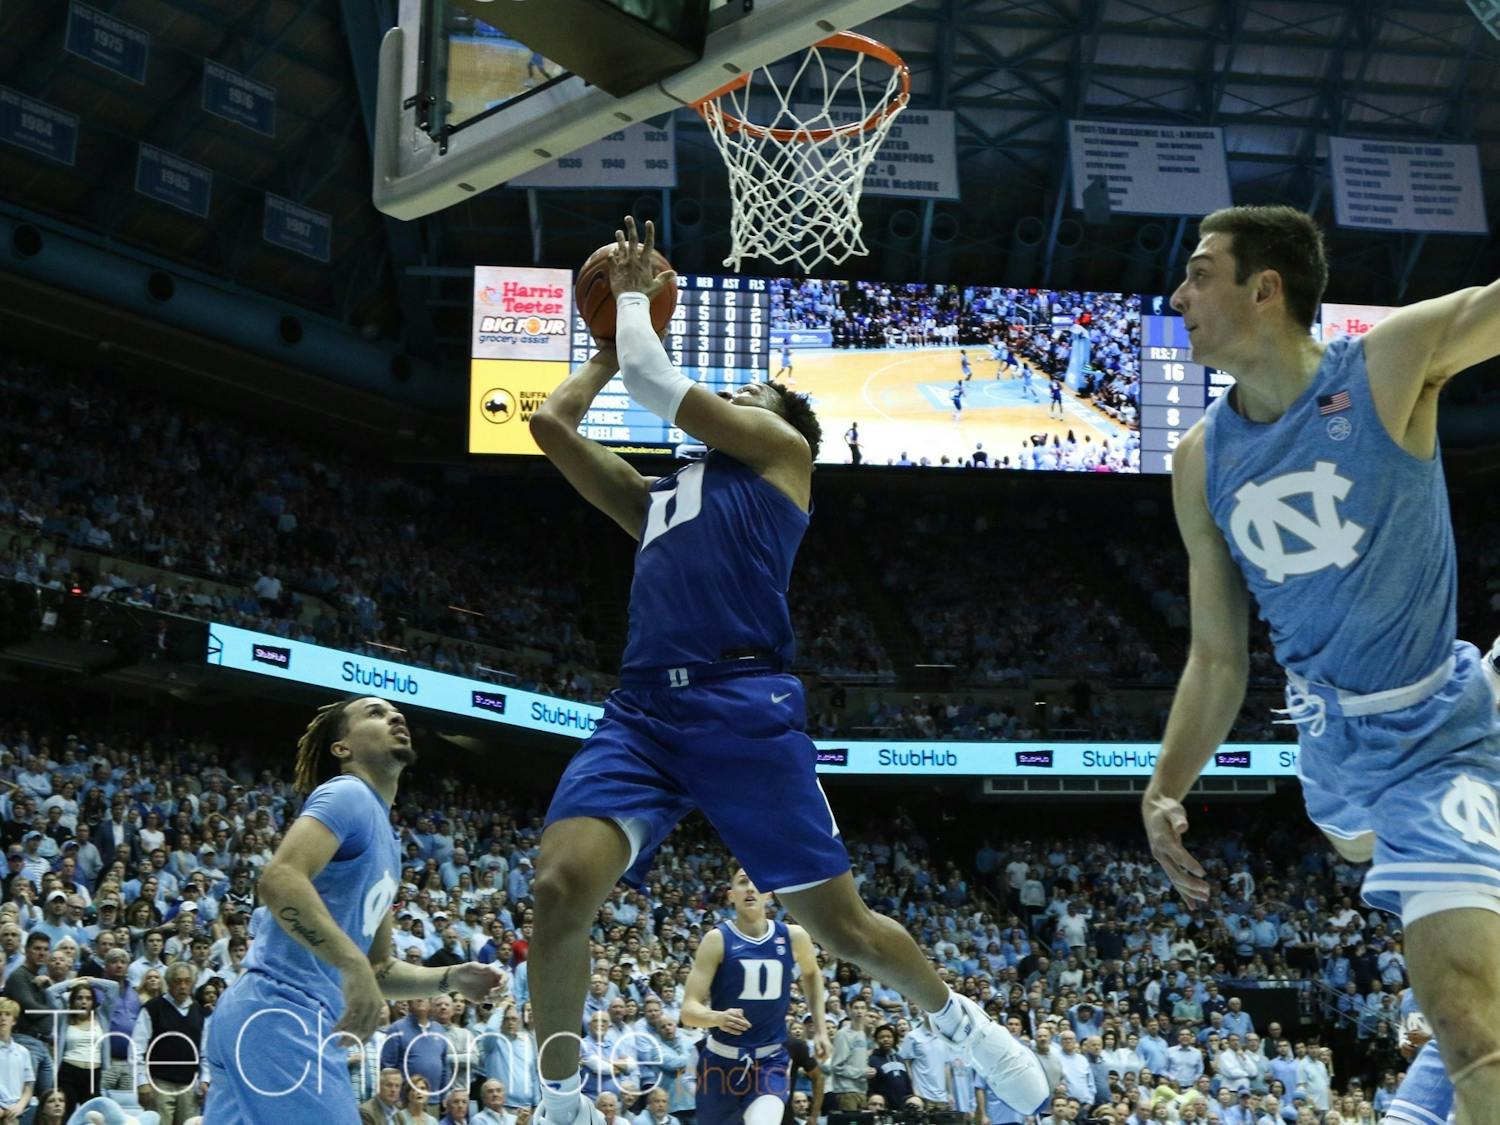 No matter the circumstances heading into the game, Duke vs. North Carolina never seems to disappoint.